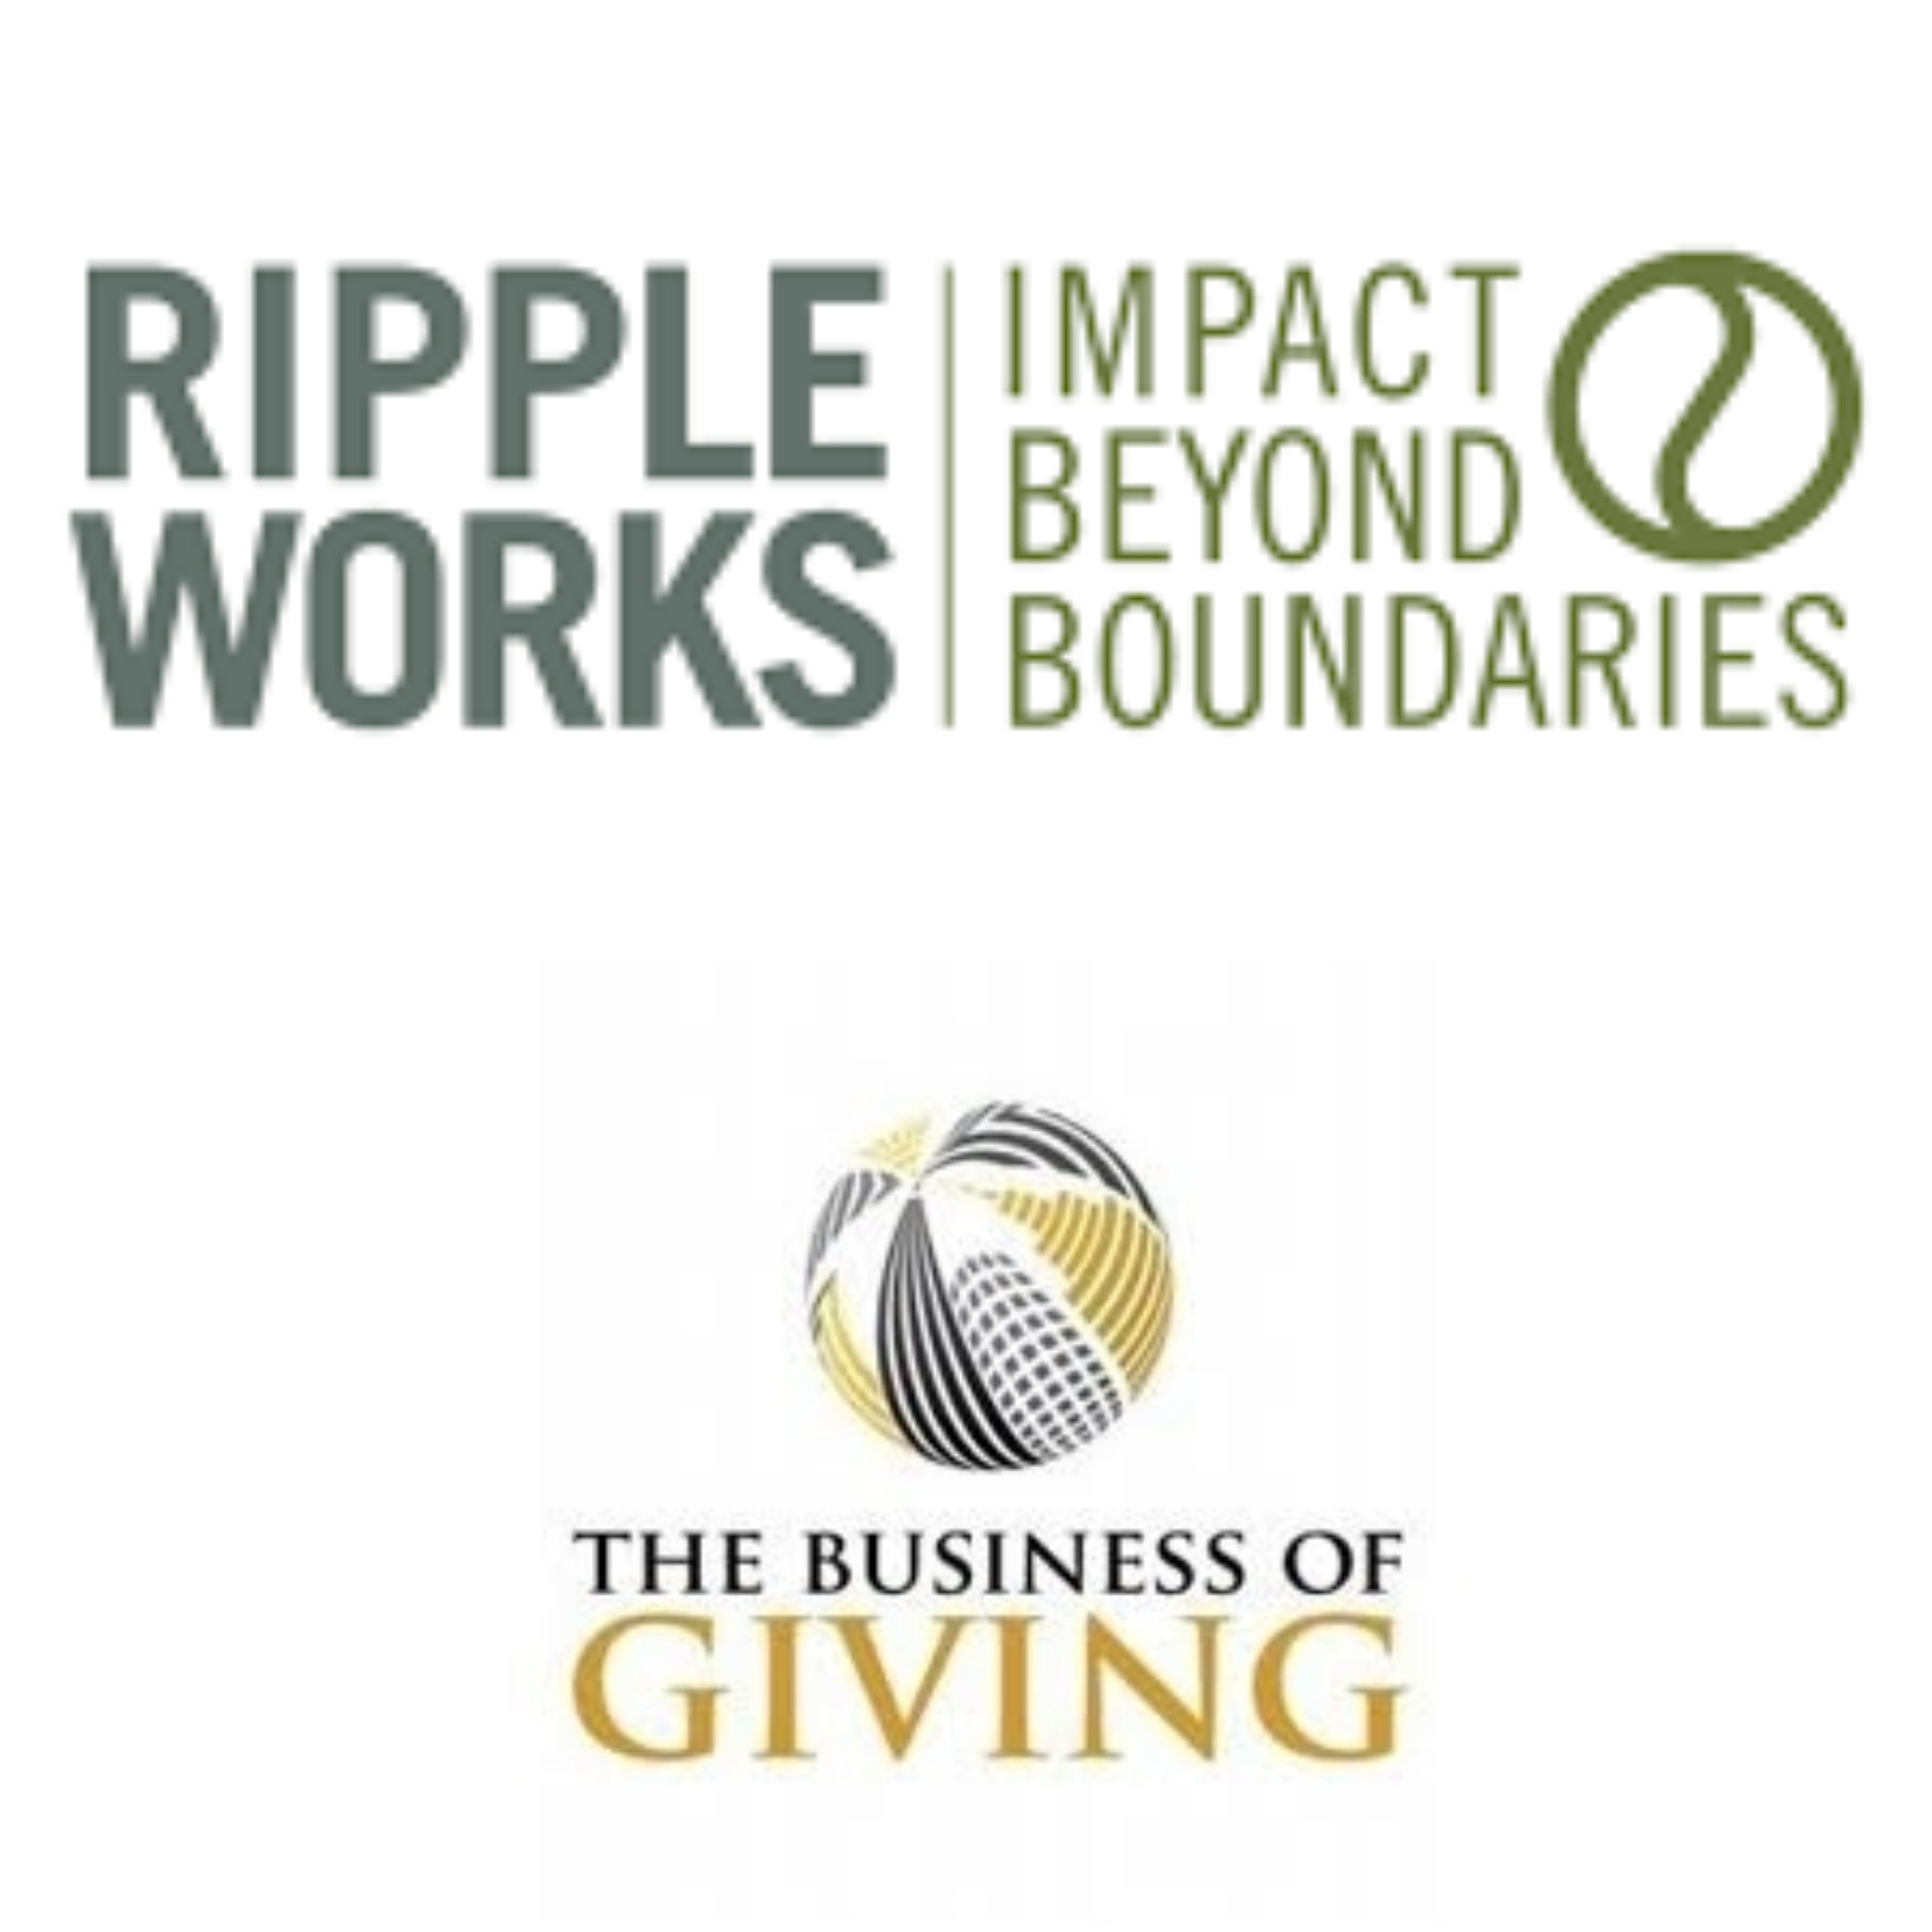 Doug Galen, the Co-Founder and Chief Executive Officer of Rippleworks